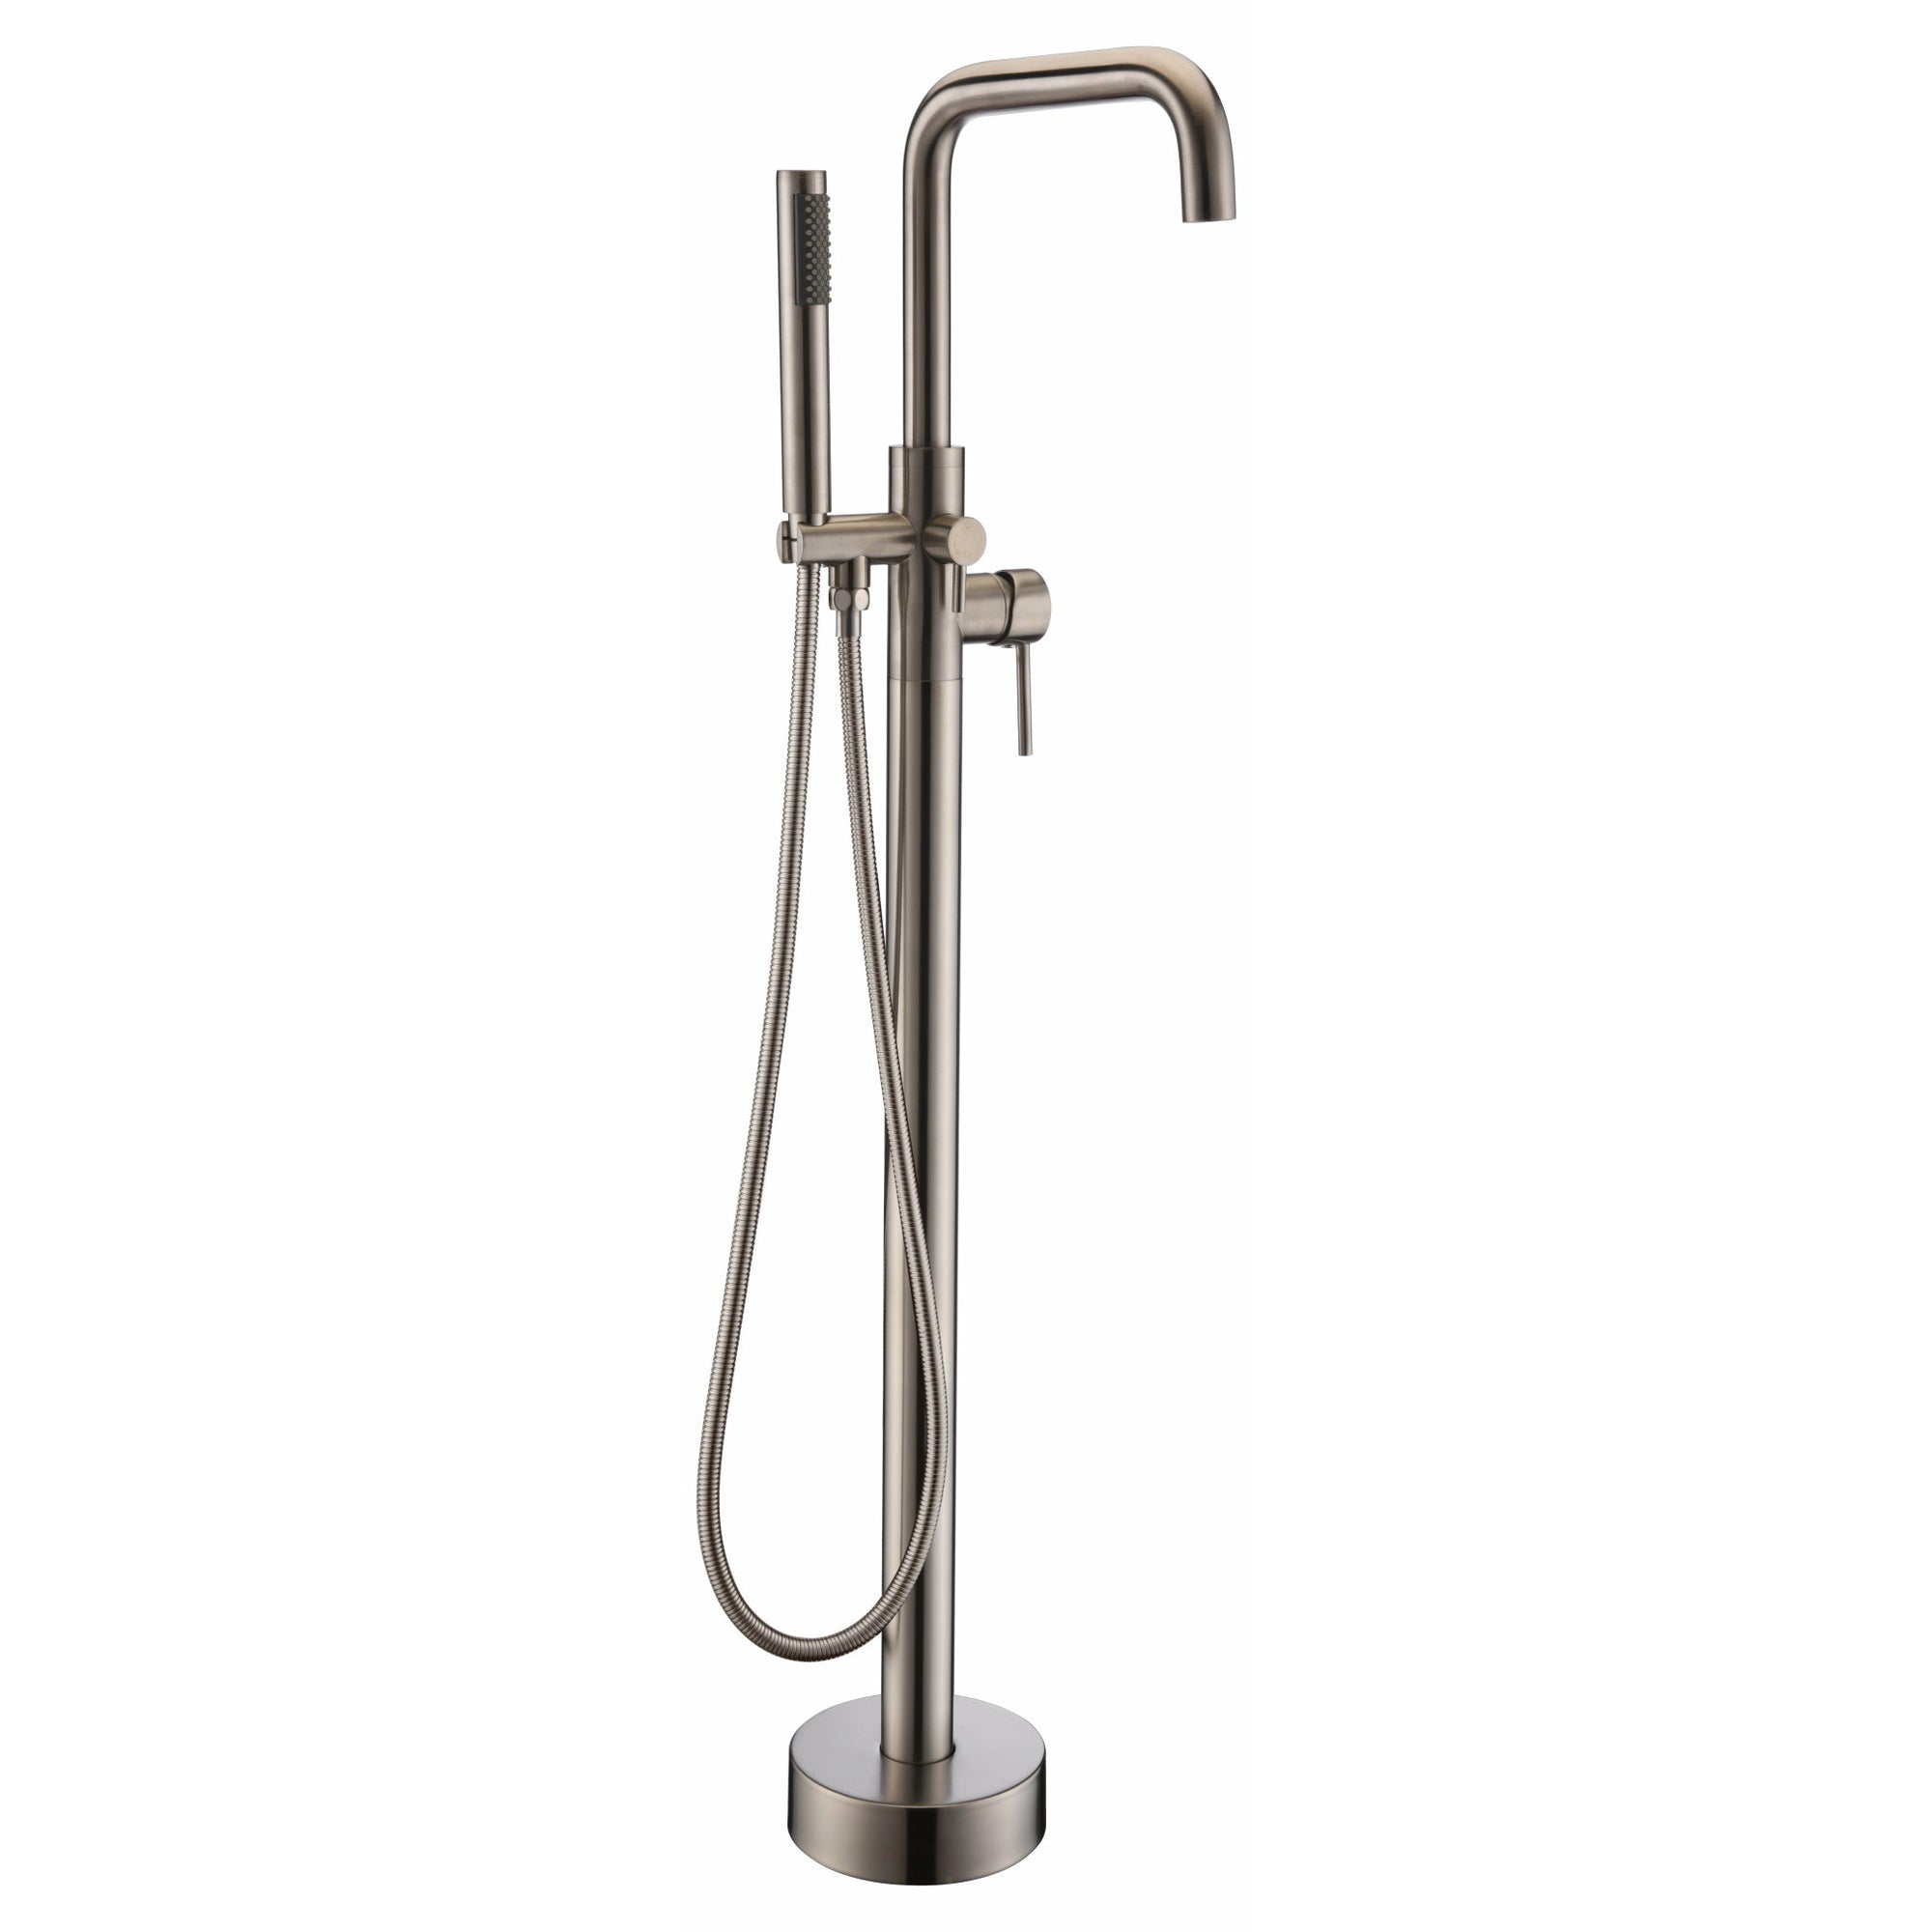 Anzzi Moray Series 2-Handle Freestanding Tub Faucet (Brushed Nickel) - Floor Mounted - Solid Brass Valve - FS-AZ0048 - Vital Hydrotherapy